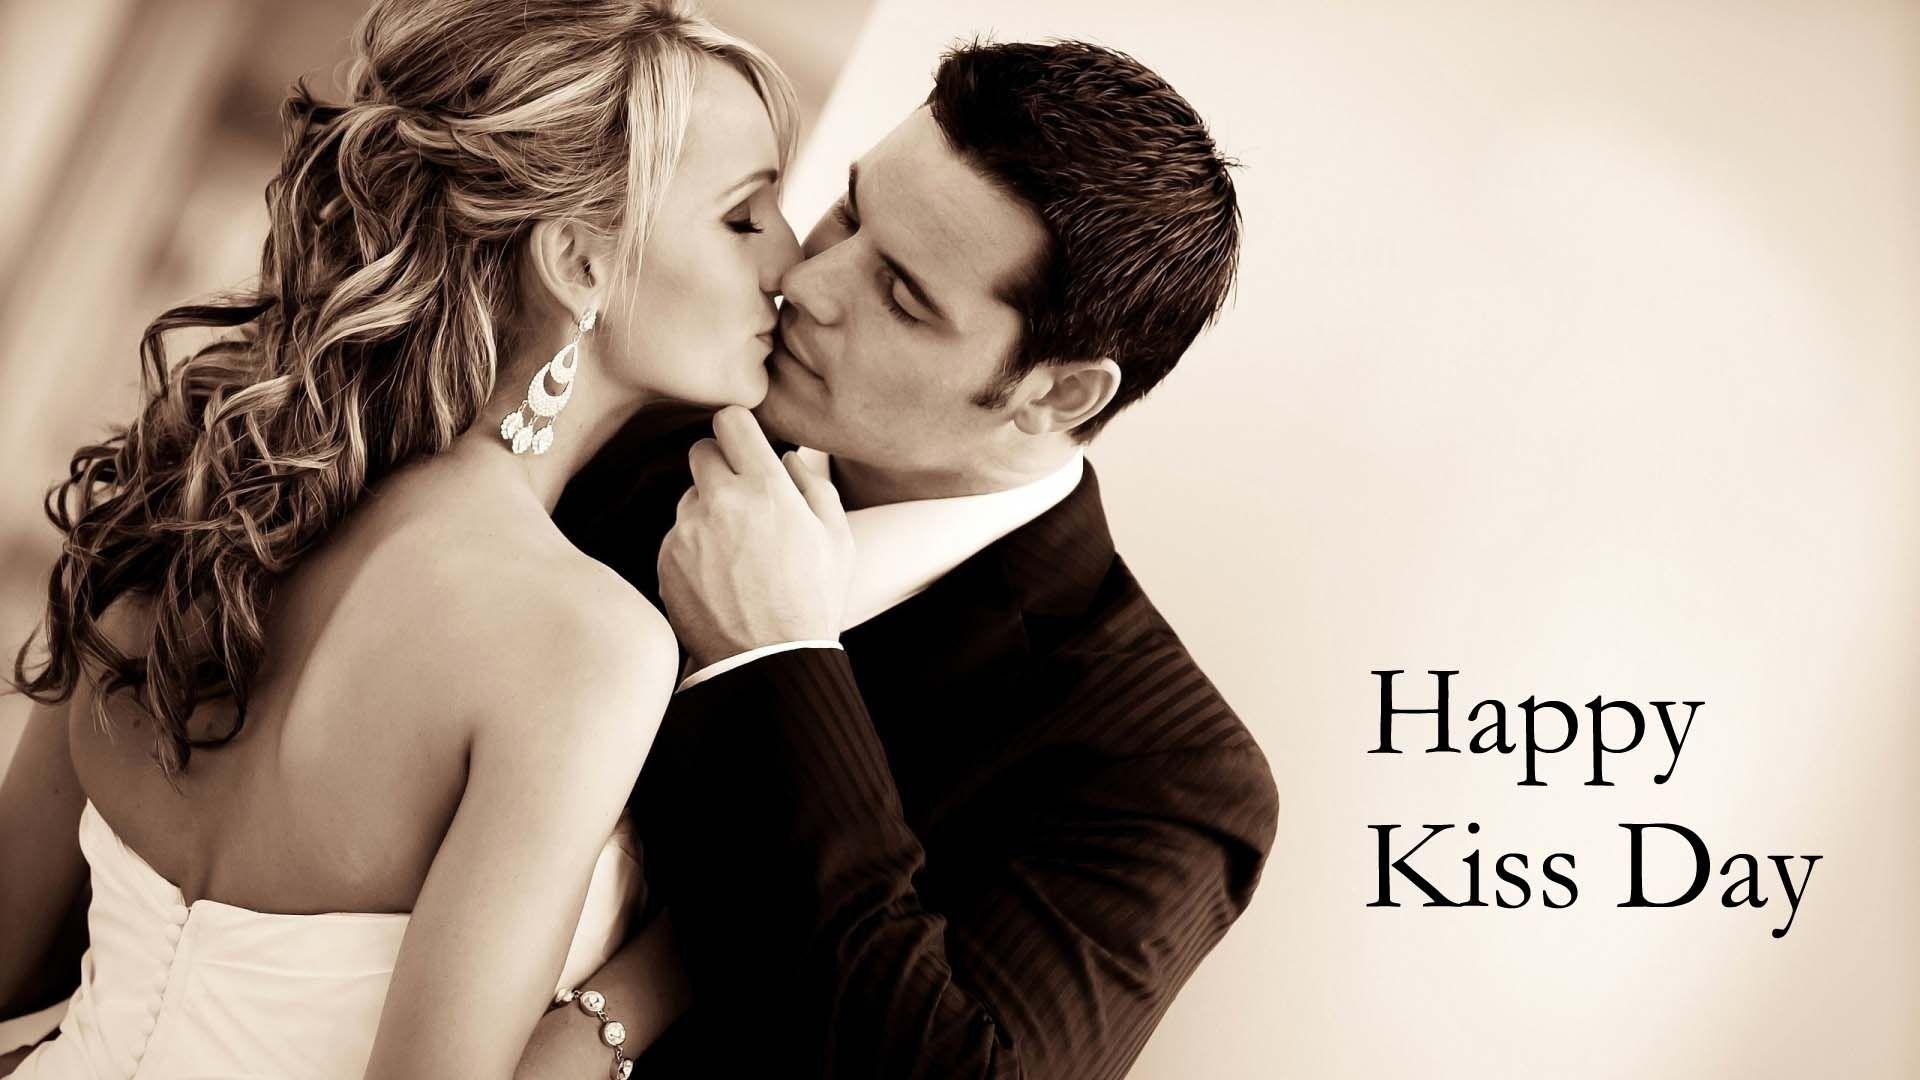 Happy Kiss day 2016 SMS, Wishes, Quotes, Wallpaper, Image